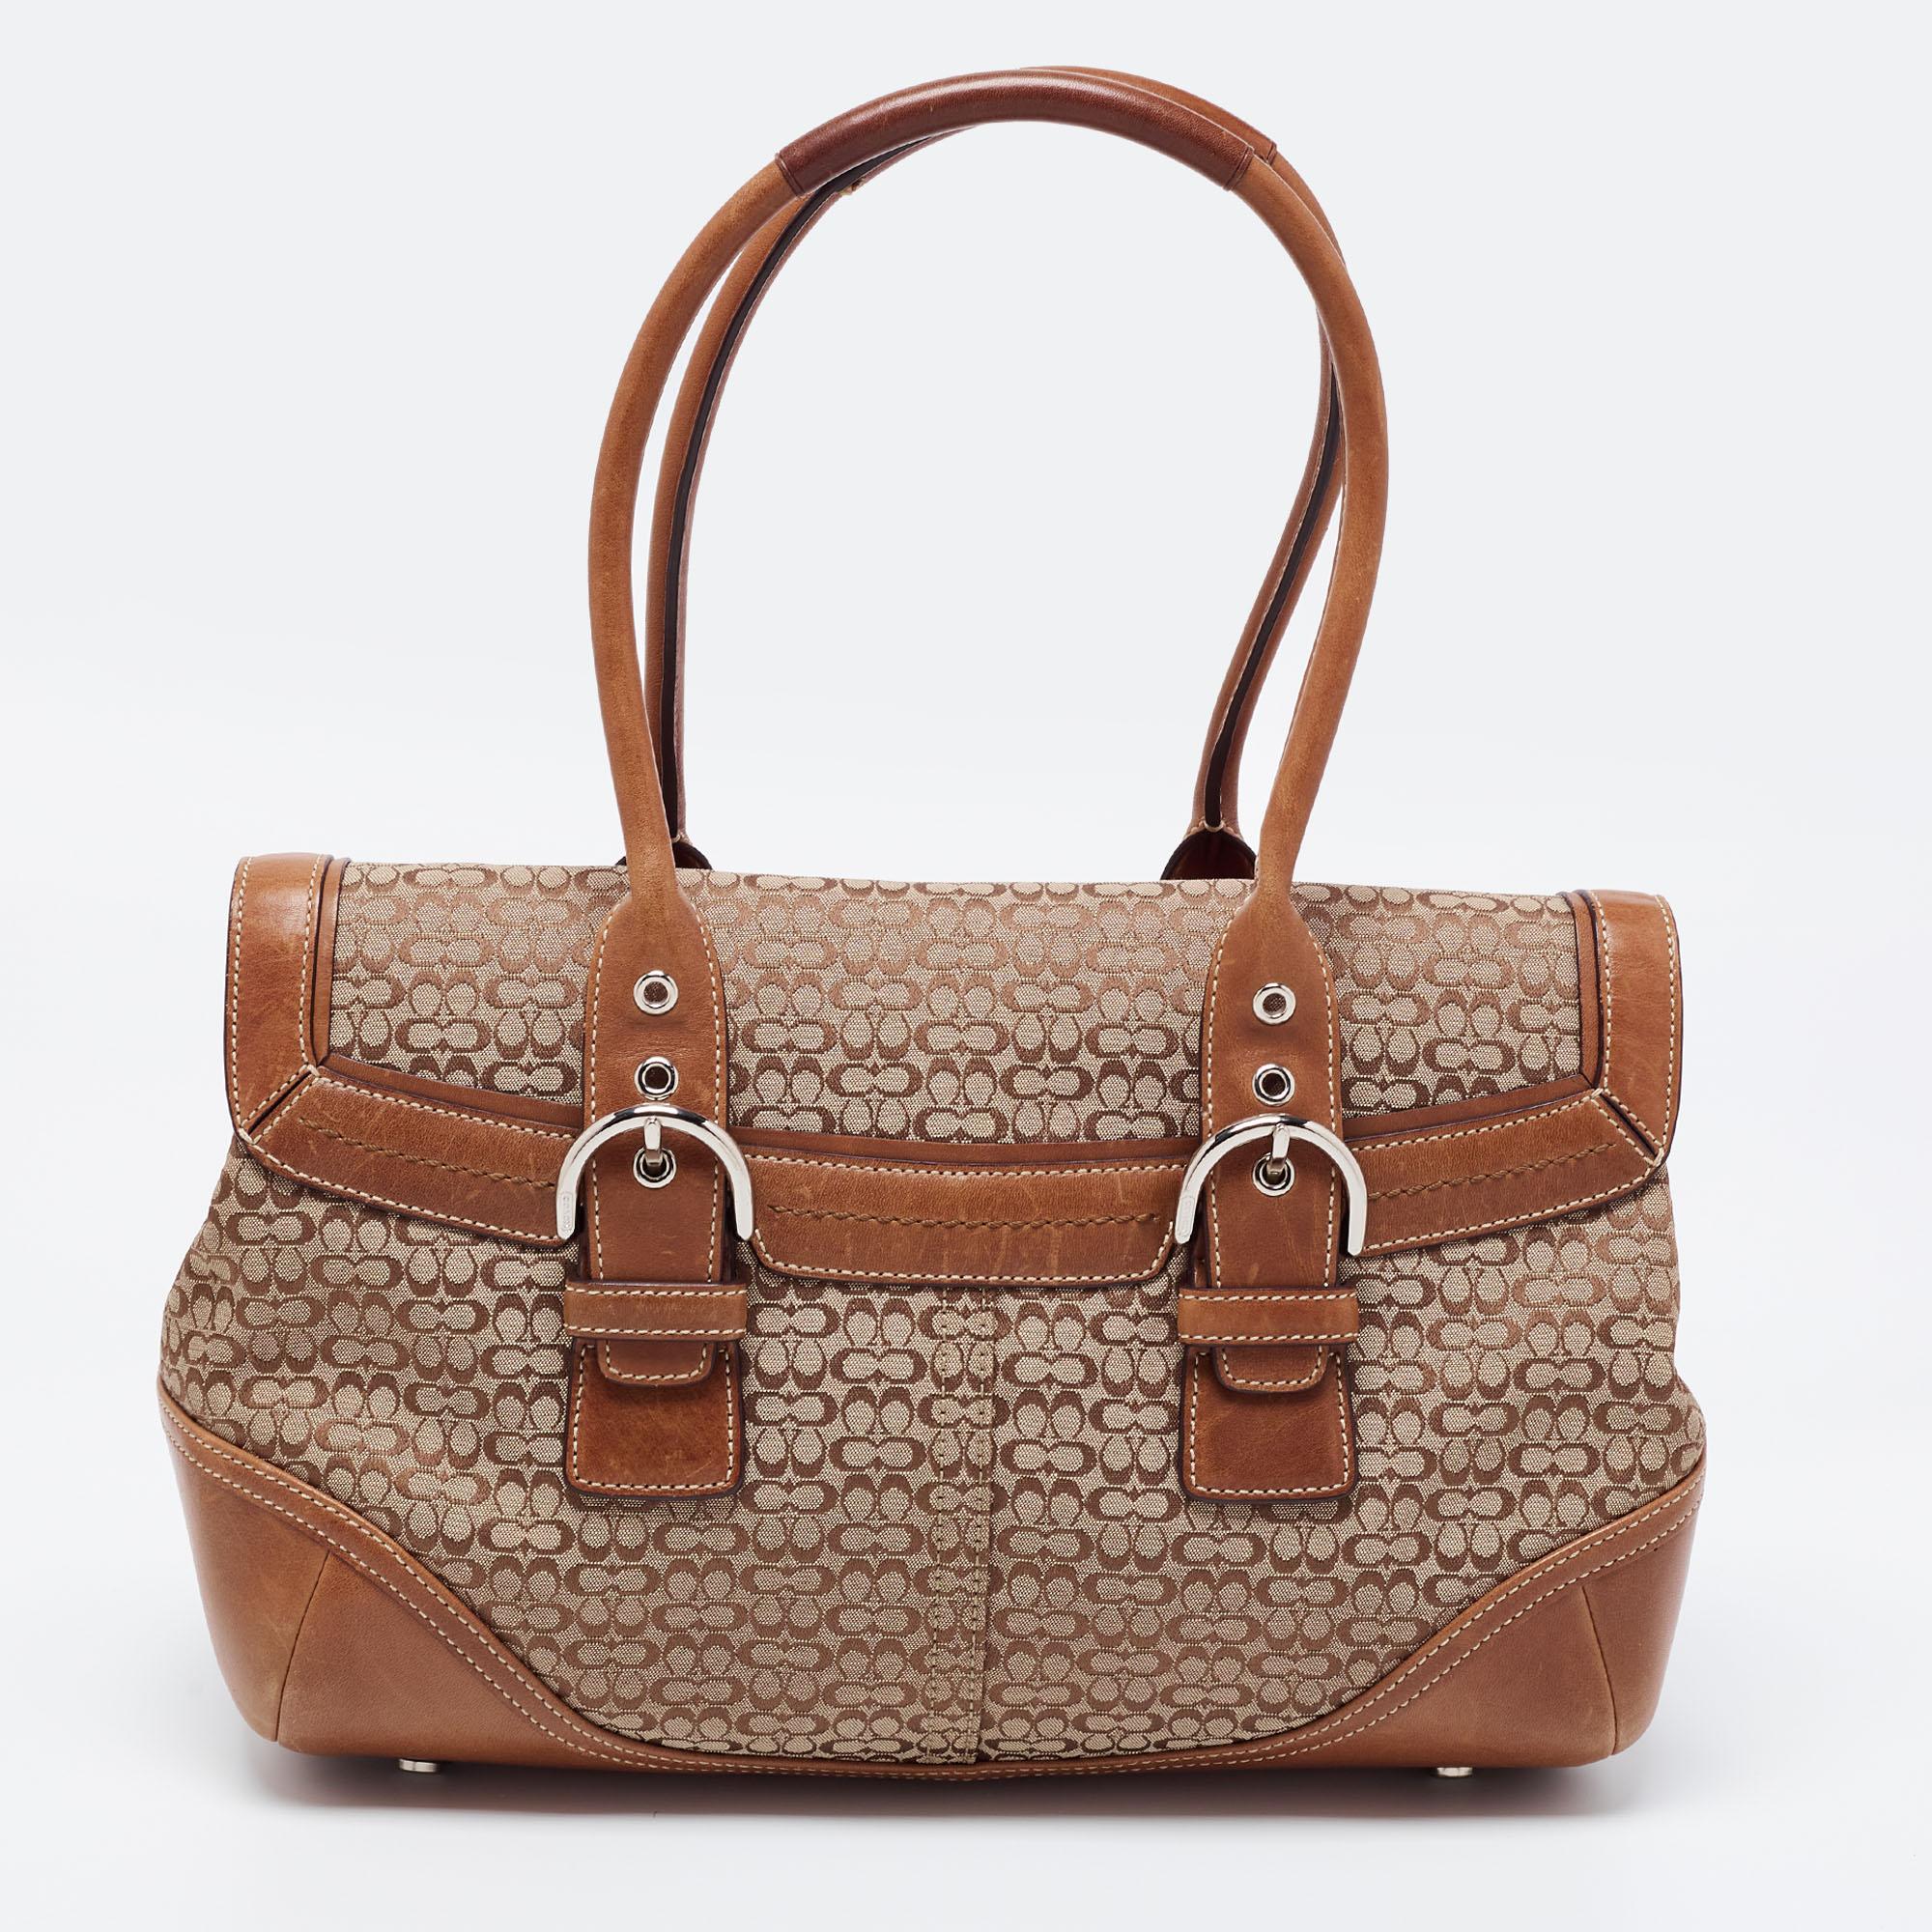 If you are seeking something that reflects chic and luxury, then this Coach satchel is a perfect choice. Crafted from signature canvas and leather, it displays a buckle closure on the front flap, silver-tone hardware, and dual handles. The